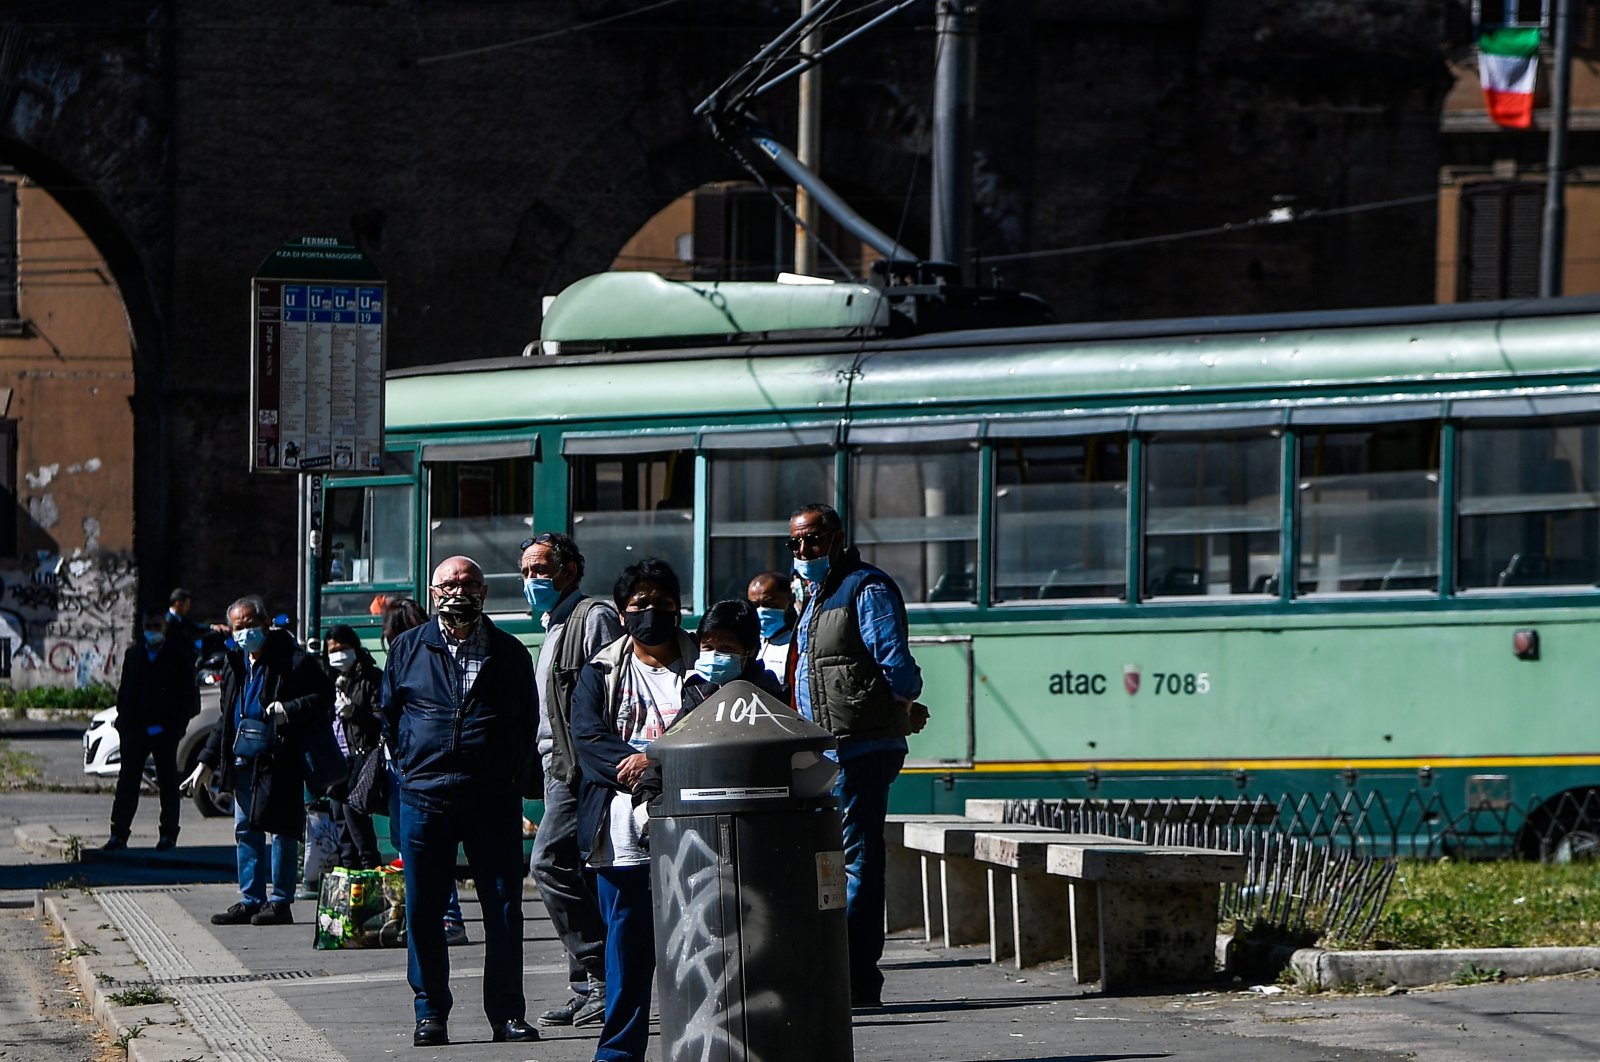 Commuters wait for the tramway at Porta Maggiore in Rome, as Italy starts to ease its lockdown aimed at curbing the spread of COVID-19, May 4, 2020. (AFP Photo)